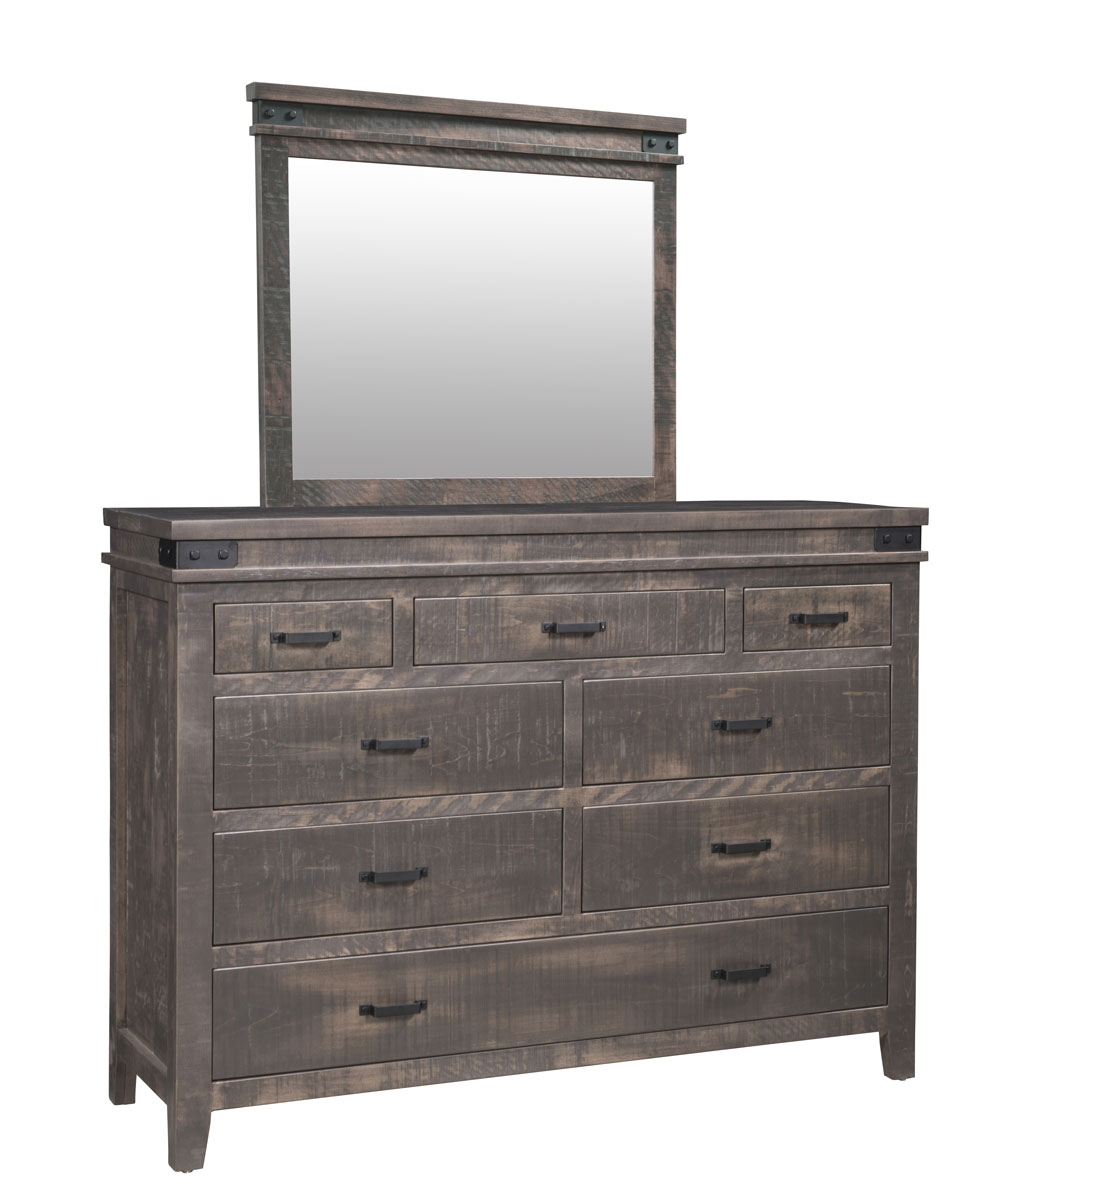 Coalbrooke 60 inch 8-Drawer Dresser with Horizontal Mirror shown in brown maple with a weathered char finish.